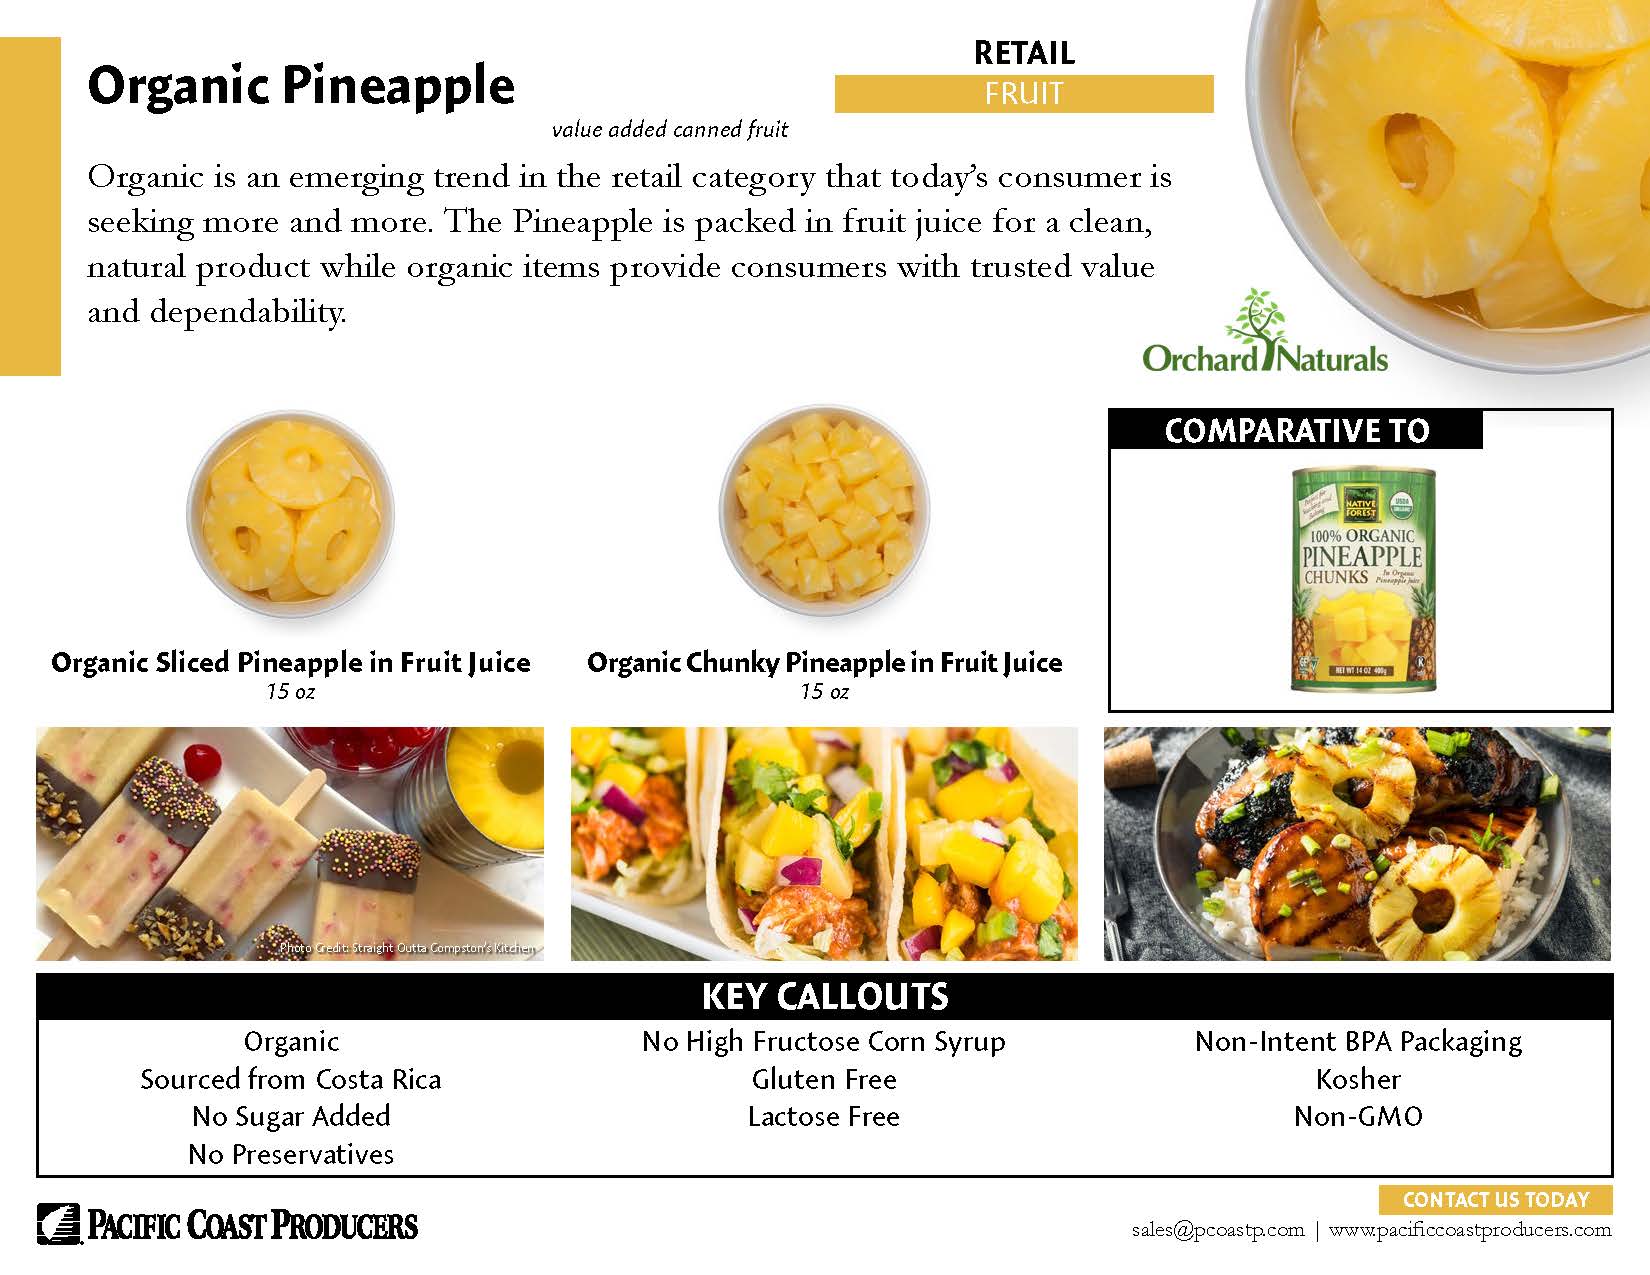 A poster showing the different types of organic pineapples.